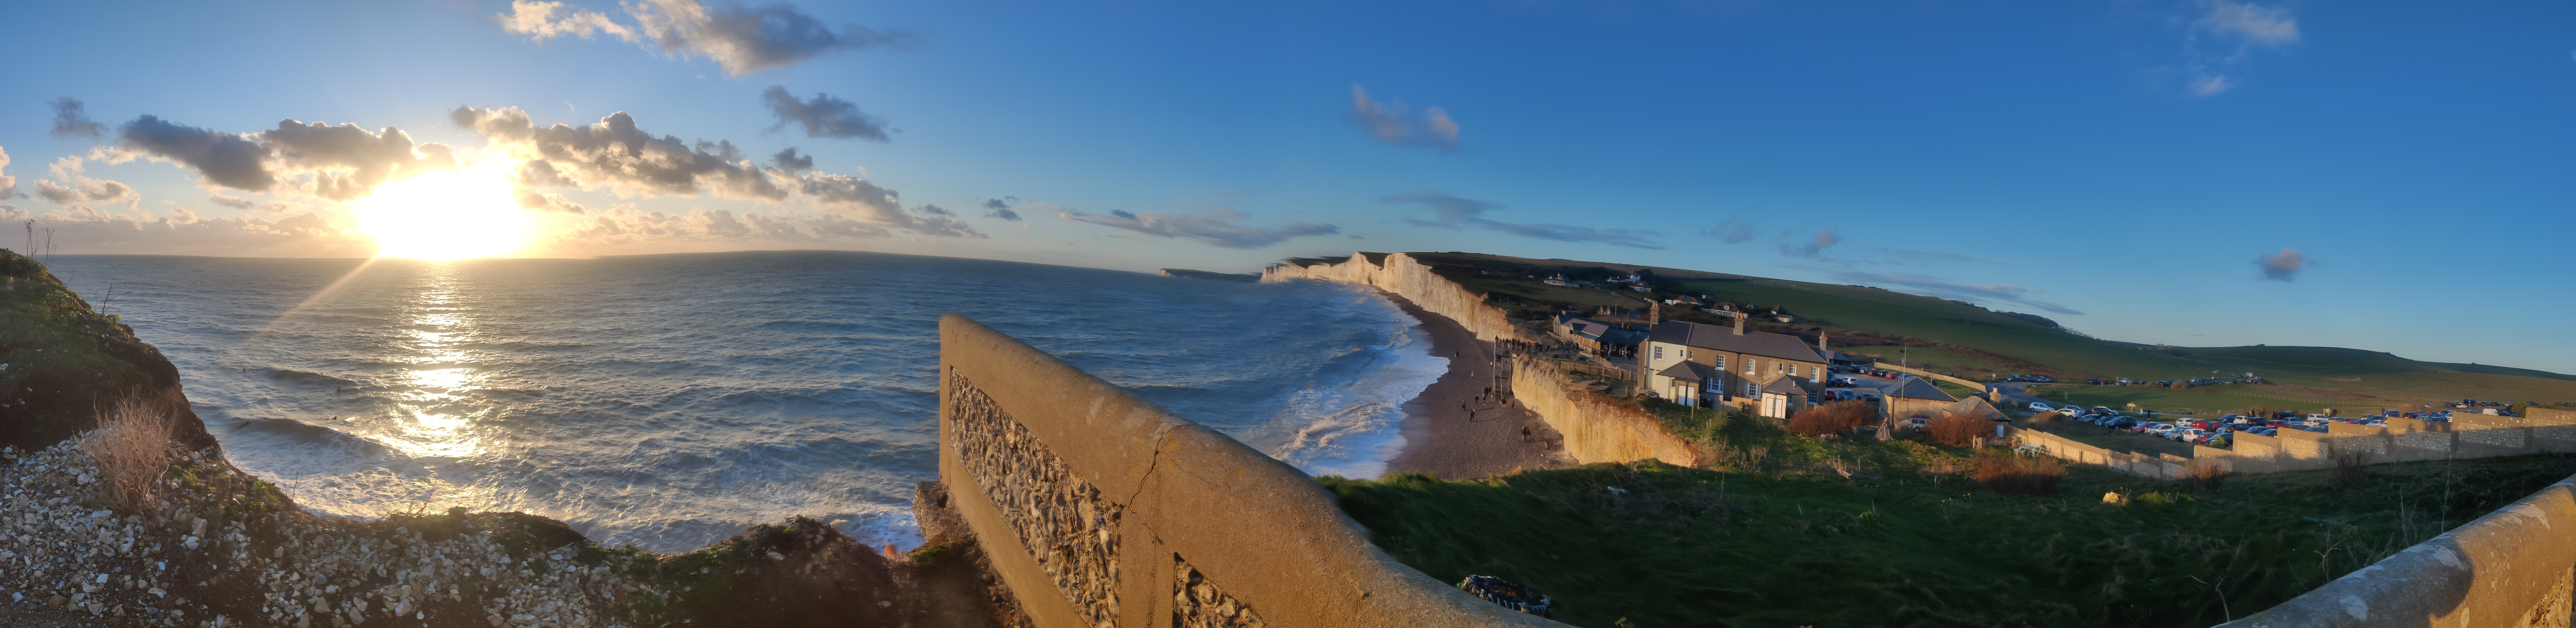 Seven Sisters: An alluring sight in the county of Sussex!